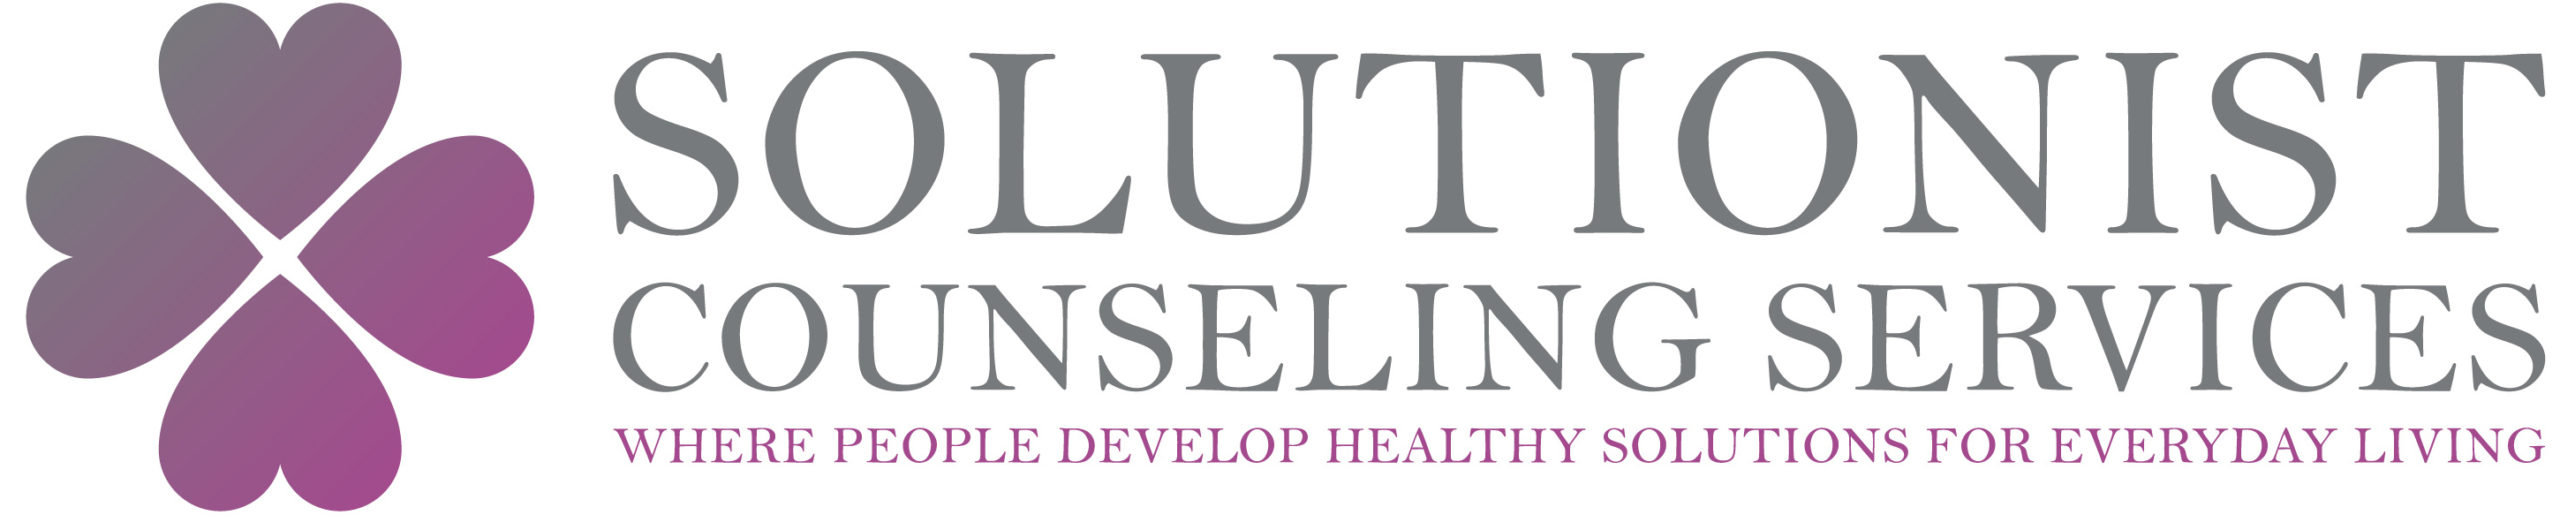 Solutionist Counseling